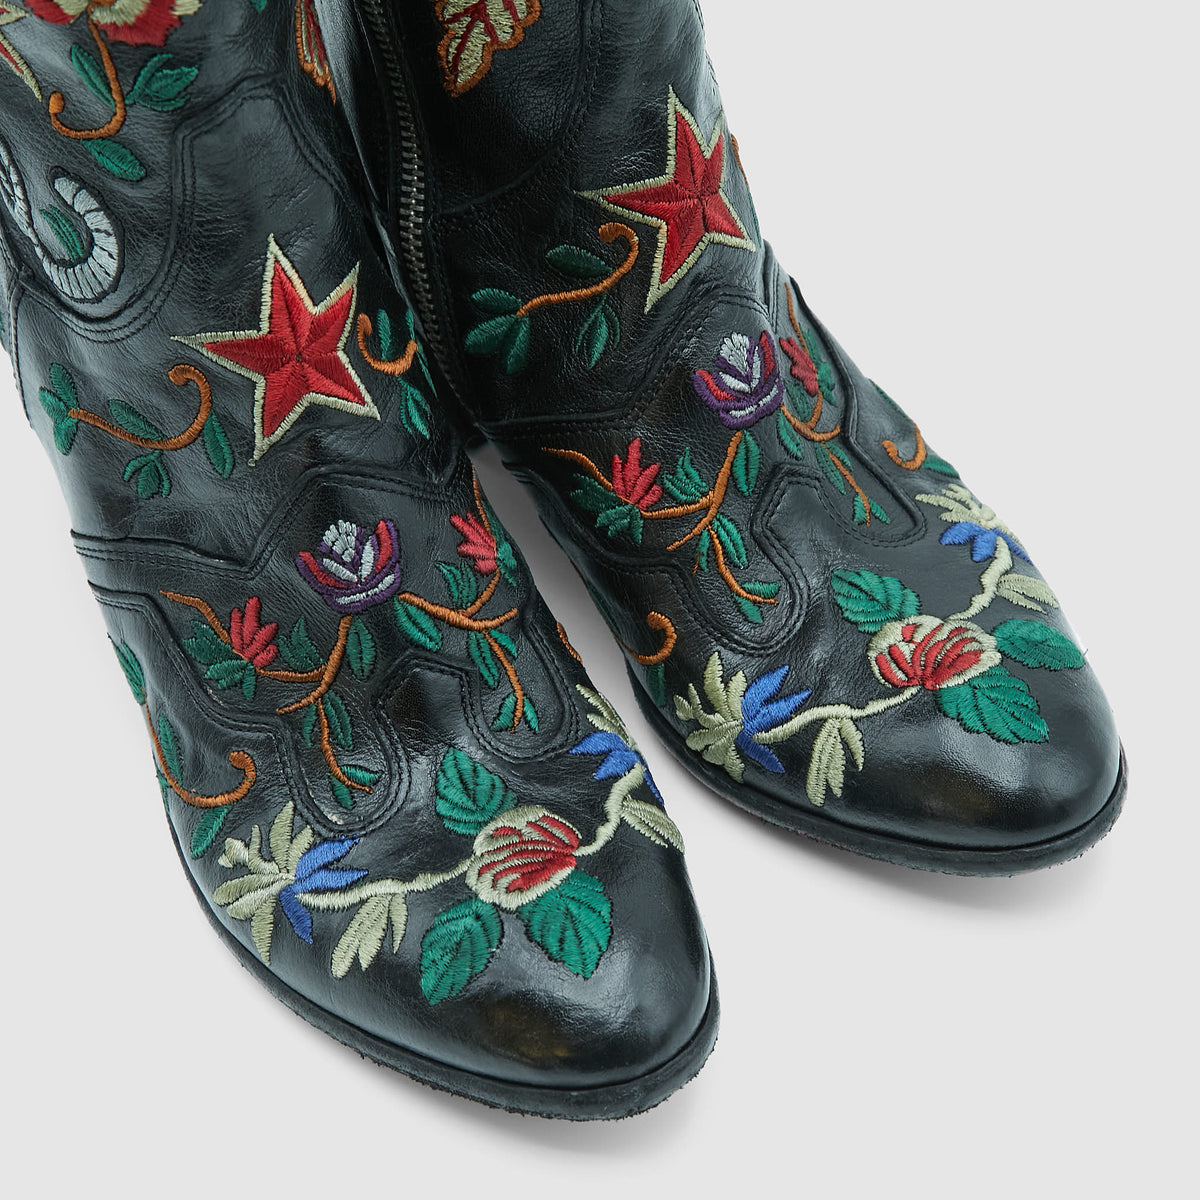 Fauzian Jeunesse Ladies Embroidered Tronchetto Western Ankle Boot With Zip